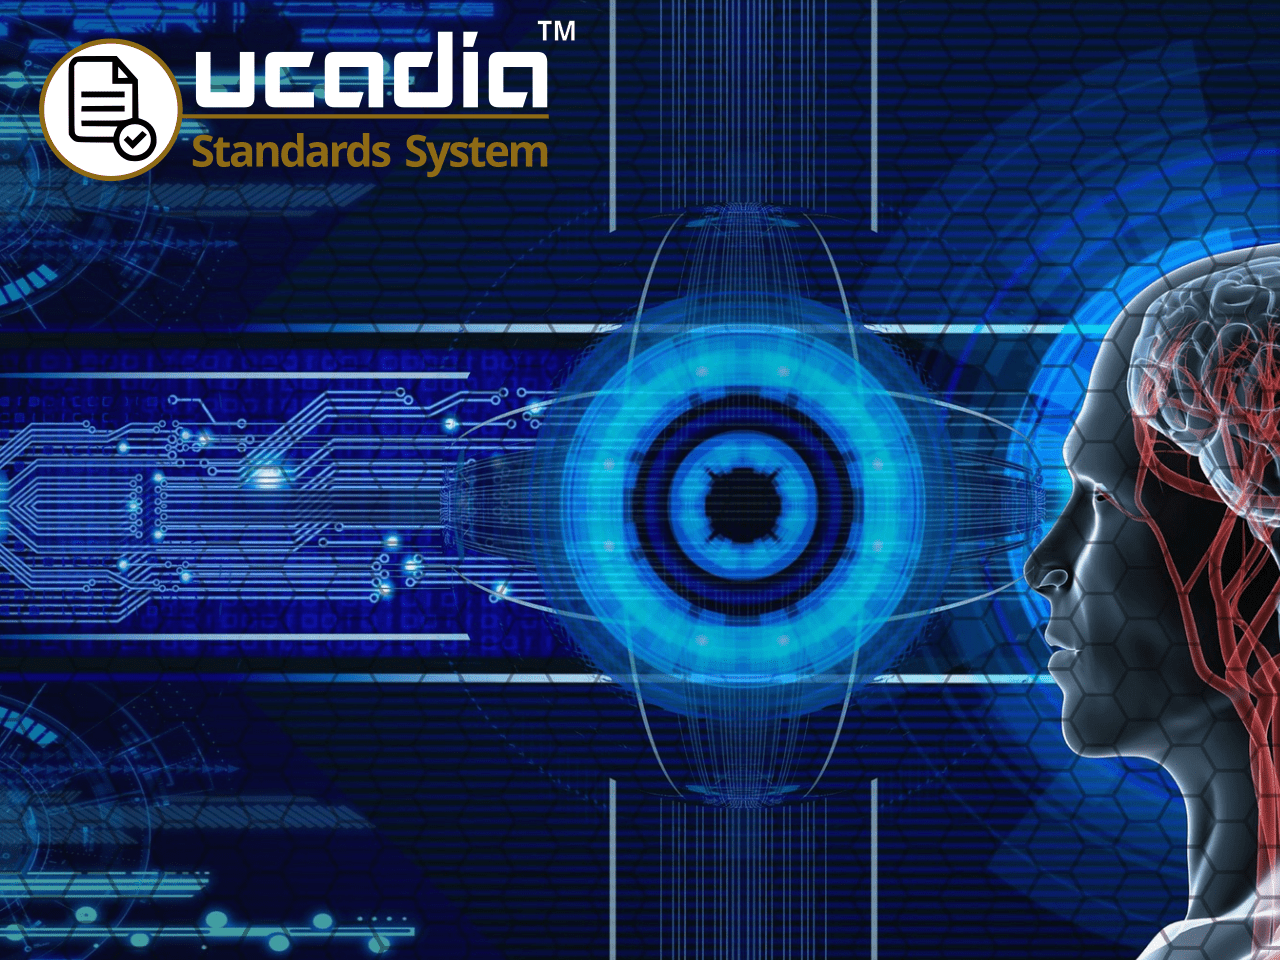 About Ucadia Standards System